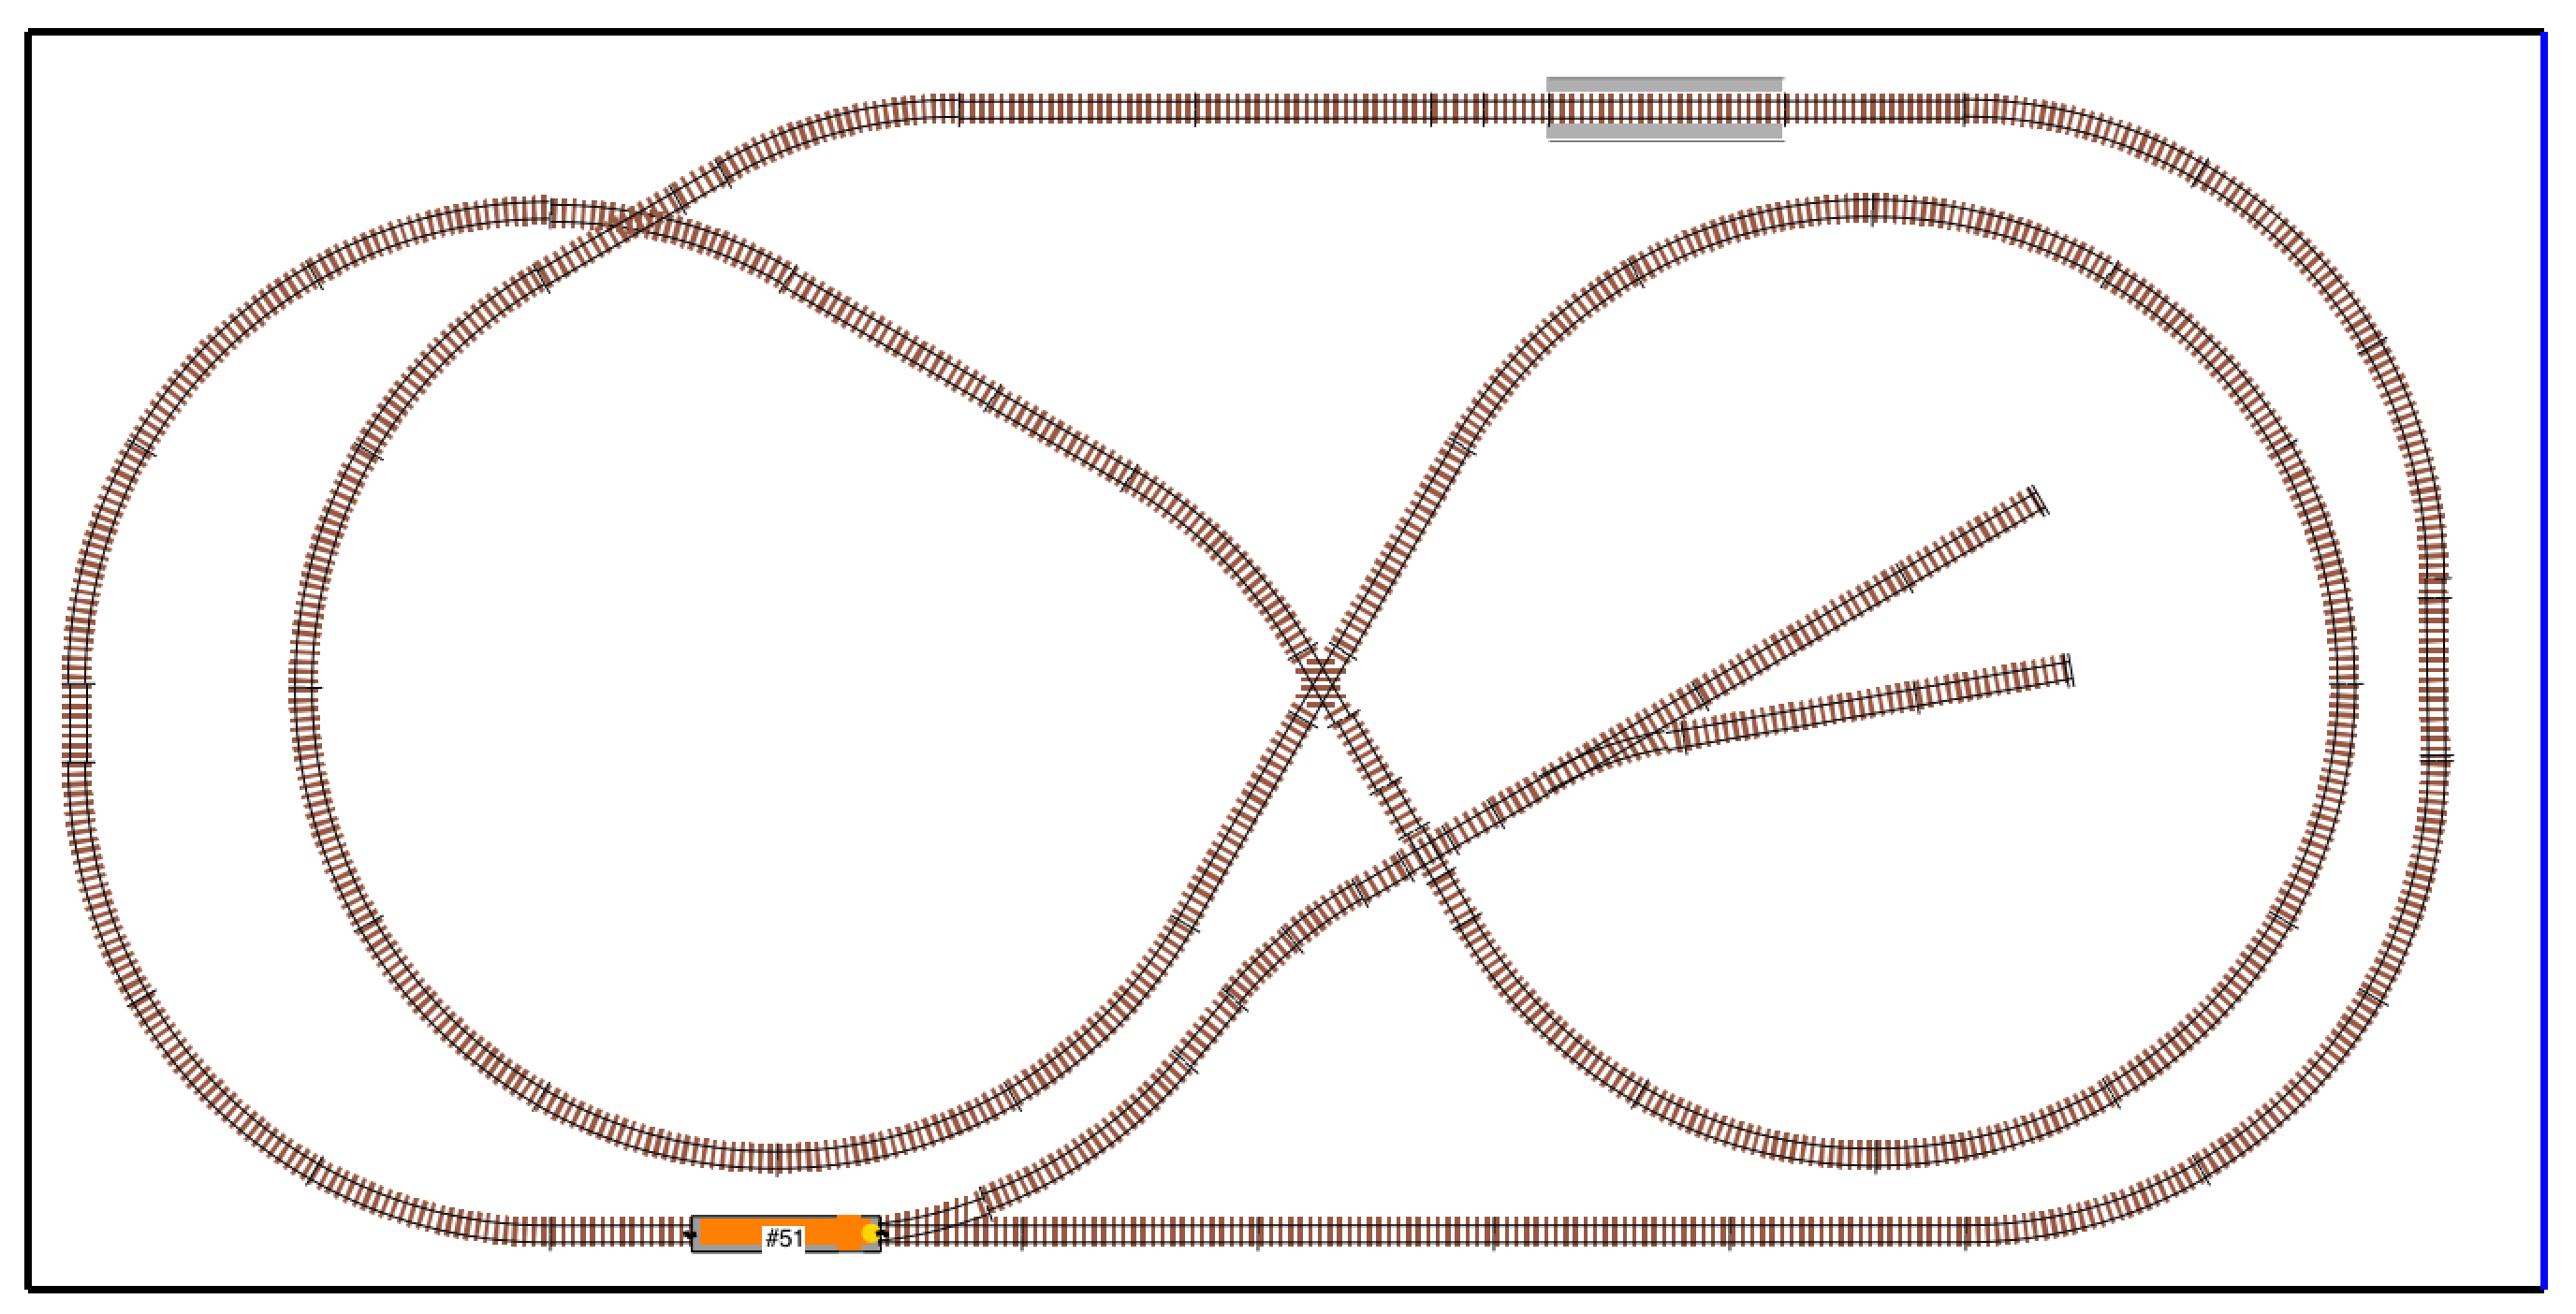 Grand Valley layout track plan with straight bridge crossing